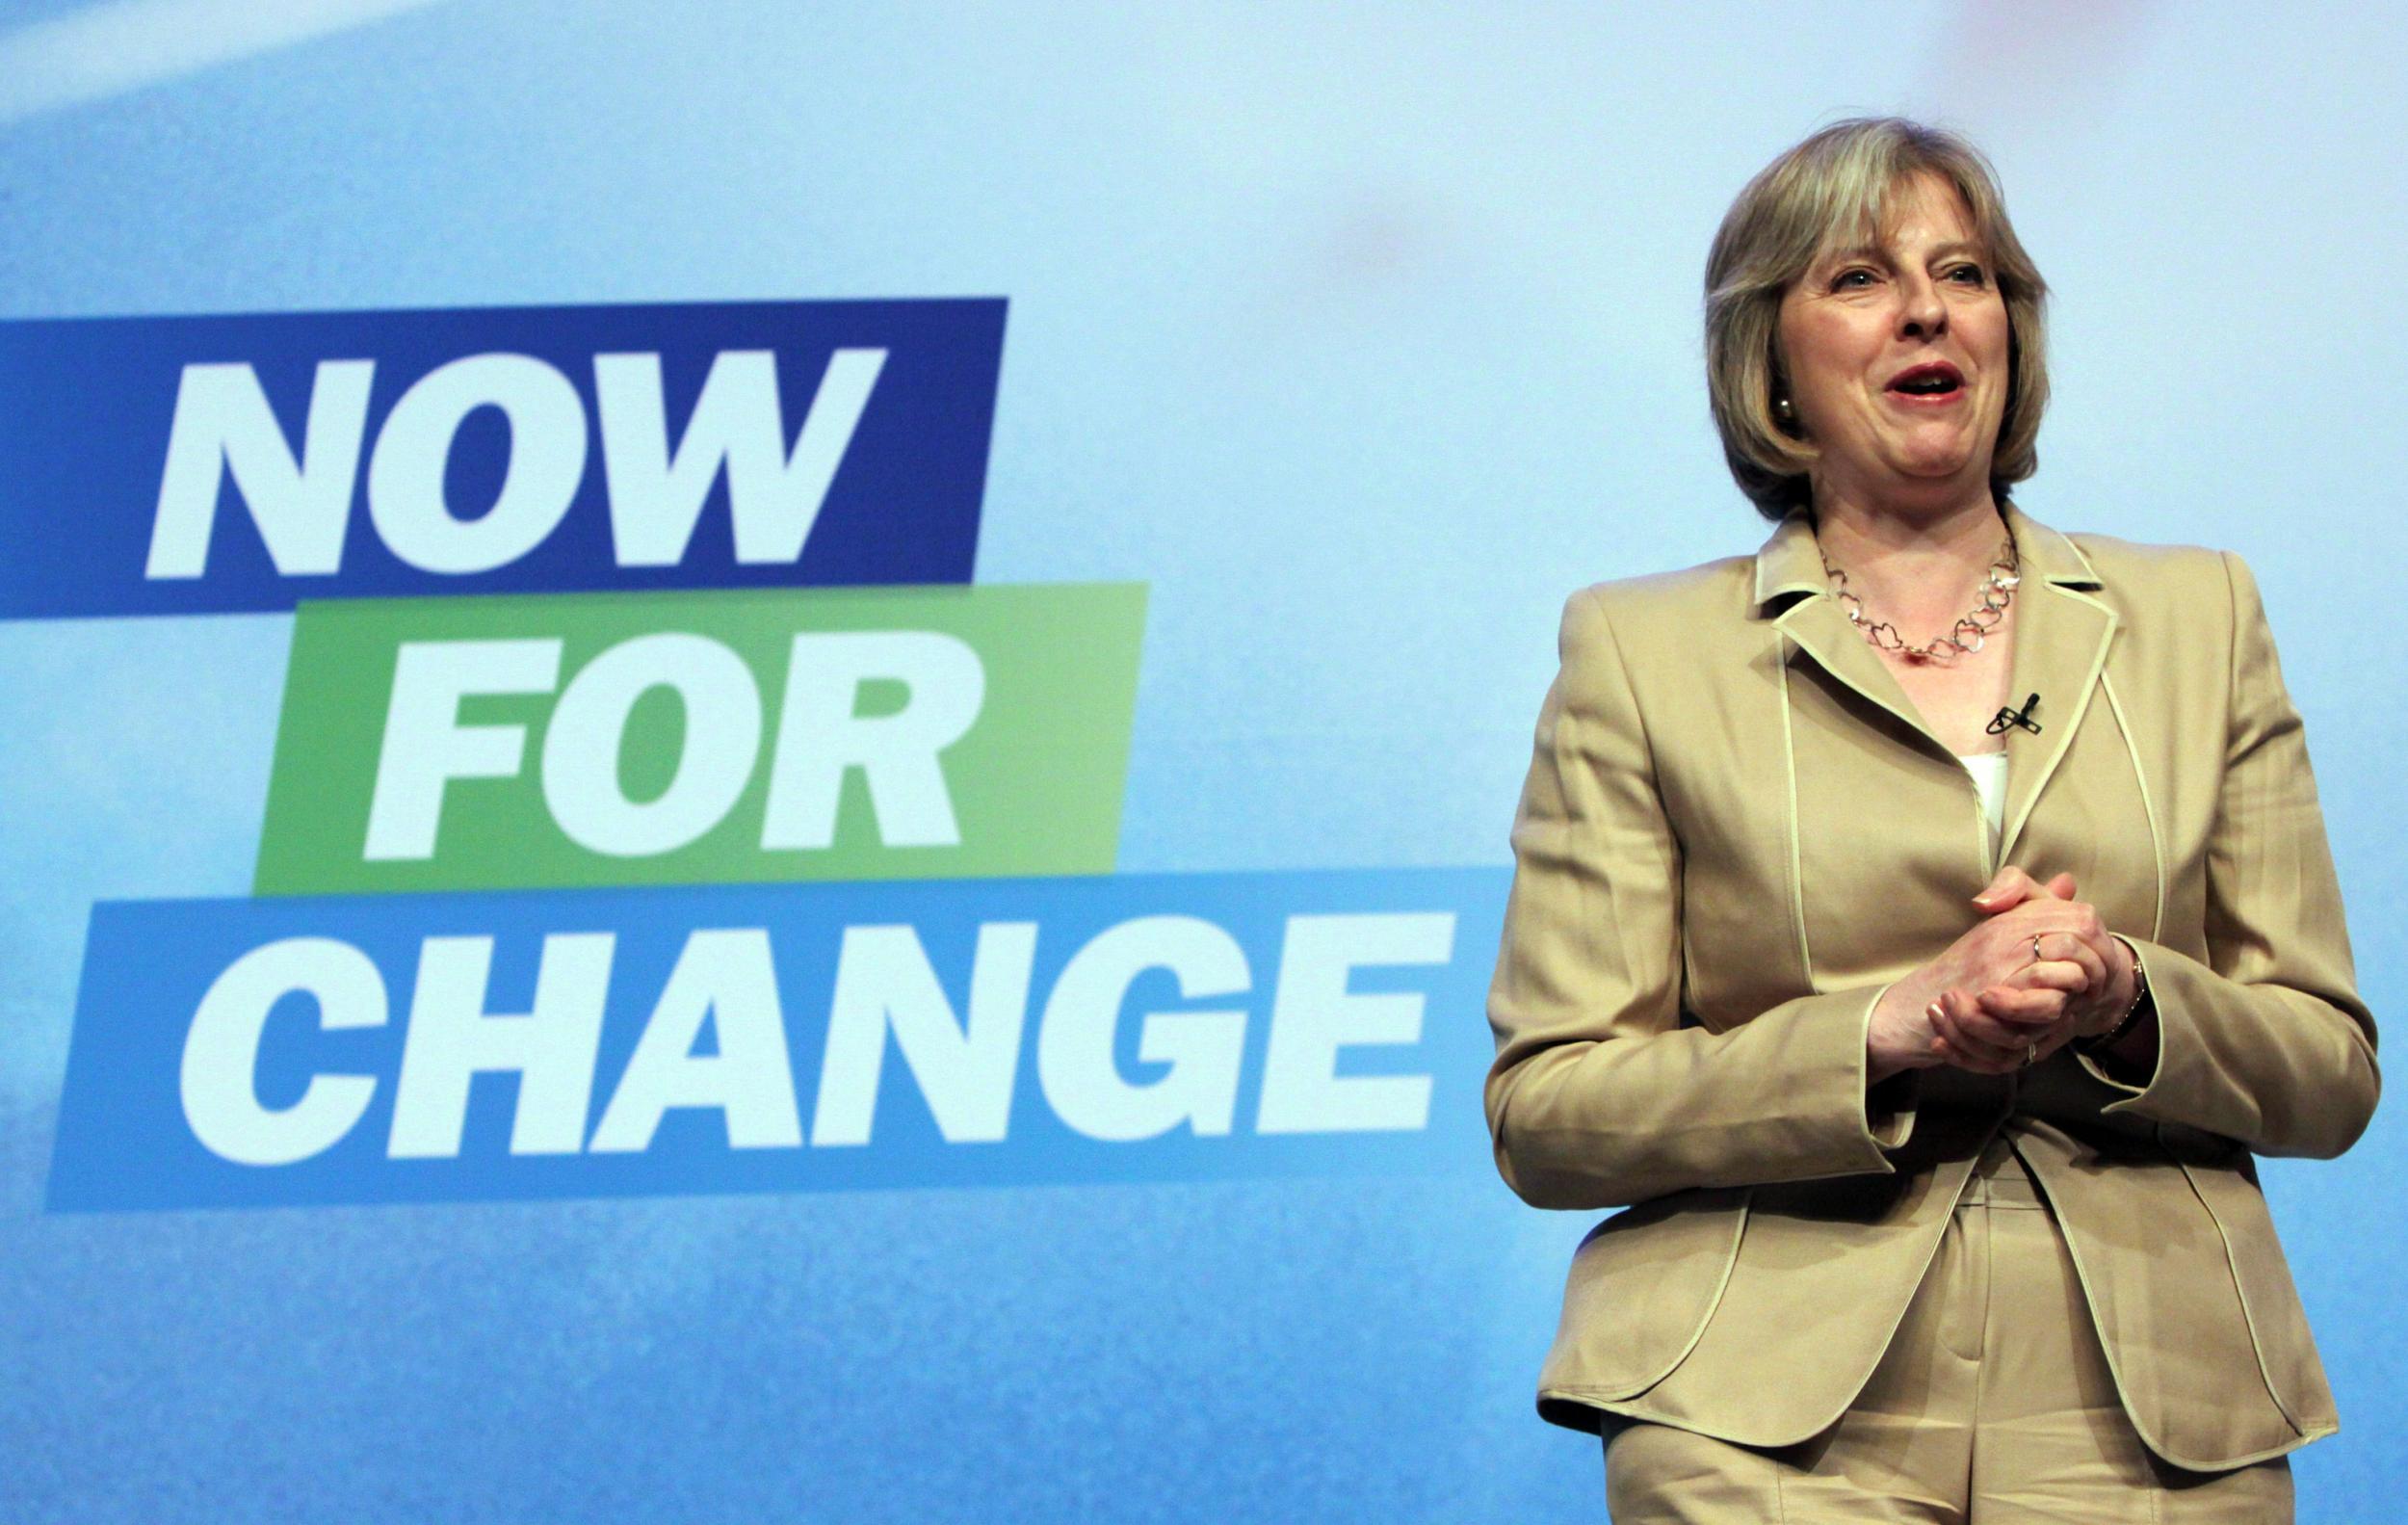 Ms May at the Tory conference in 2009, the year in which she said her Maidenhead constituents would be ‘devastated’ by the then Labour Government’s plans for a third runway